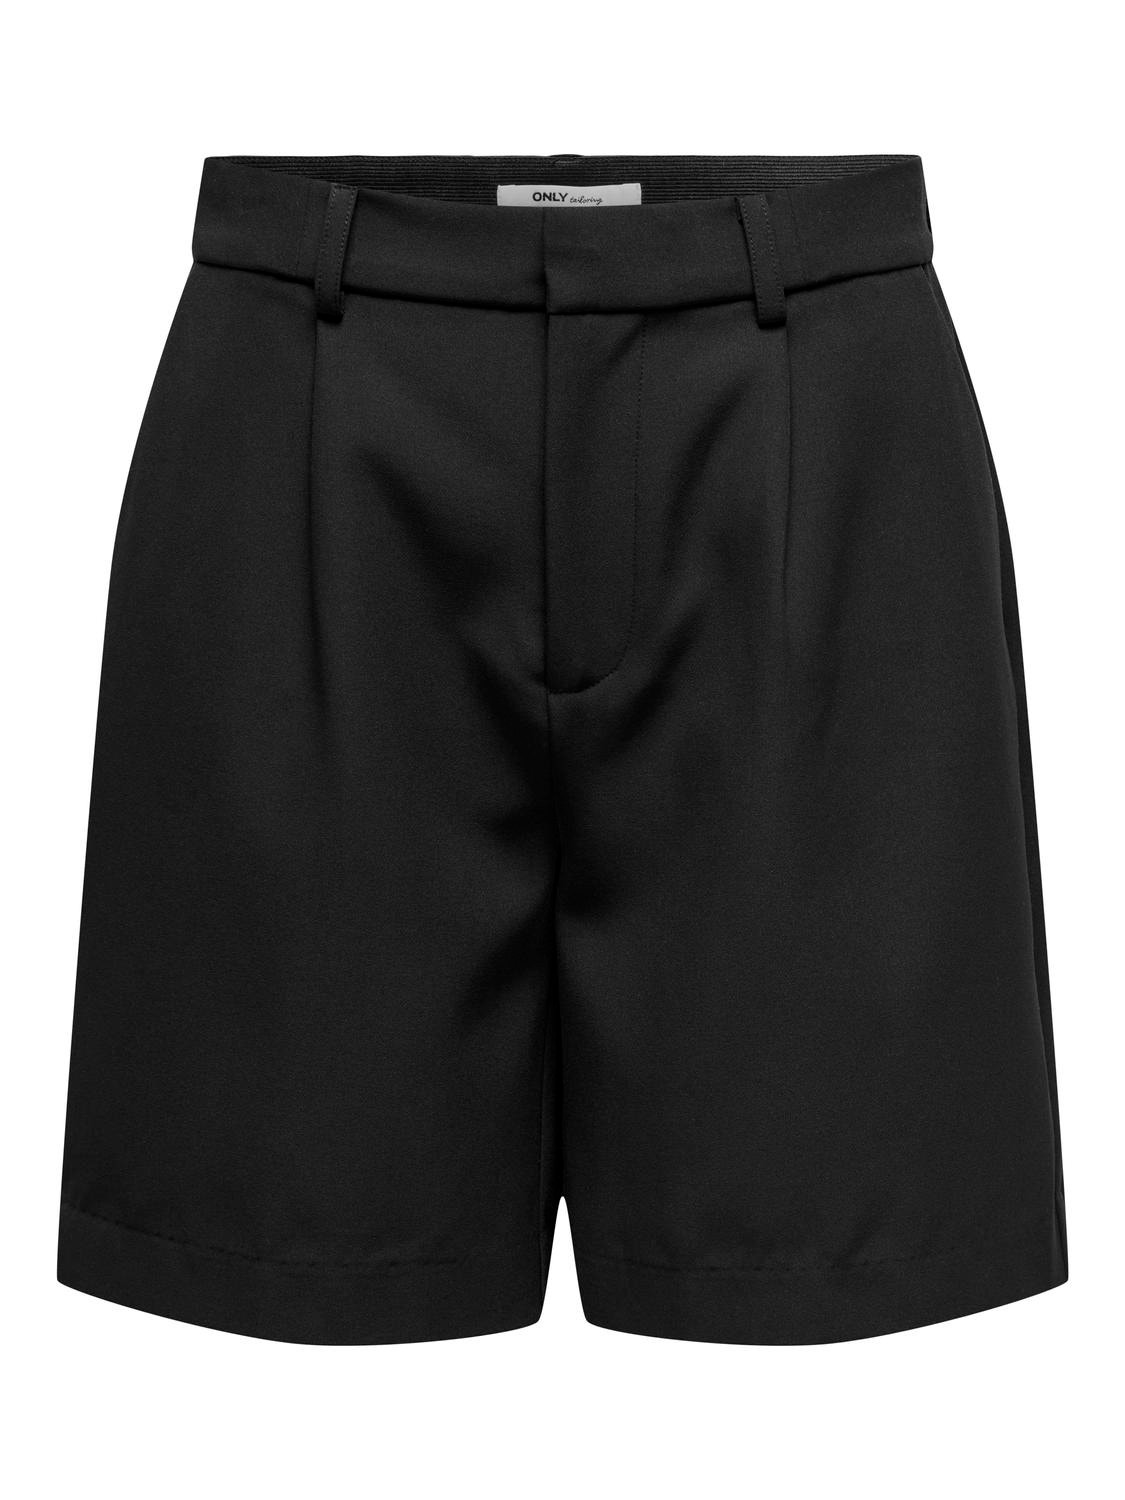 ONLY Normal passform Shorts -Black - 15338287